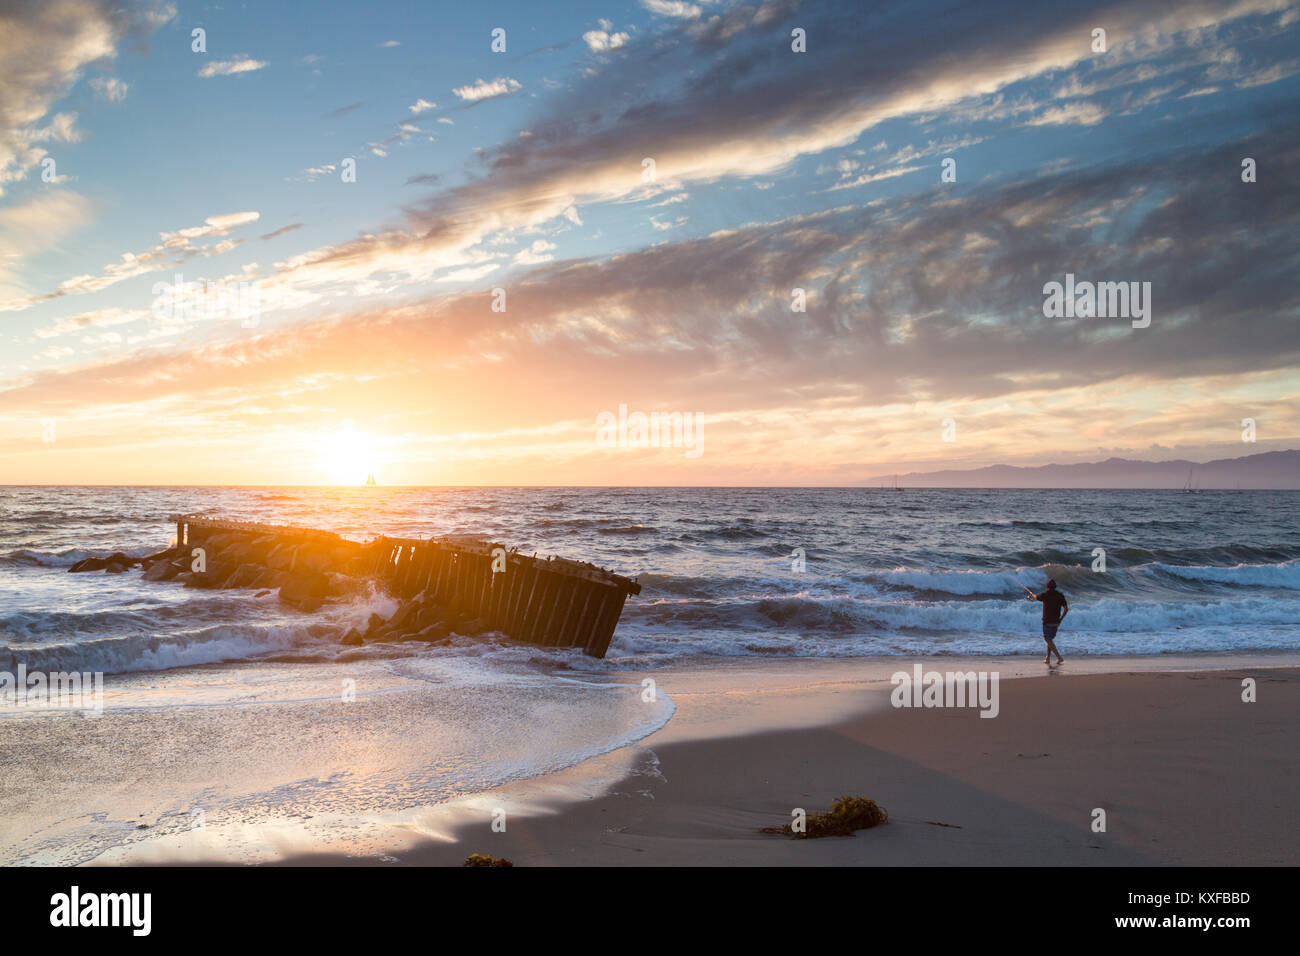 A fisherman casts his line from the beach at sunset in Playa Del Rey, California. Stock Photo